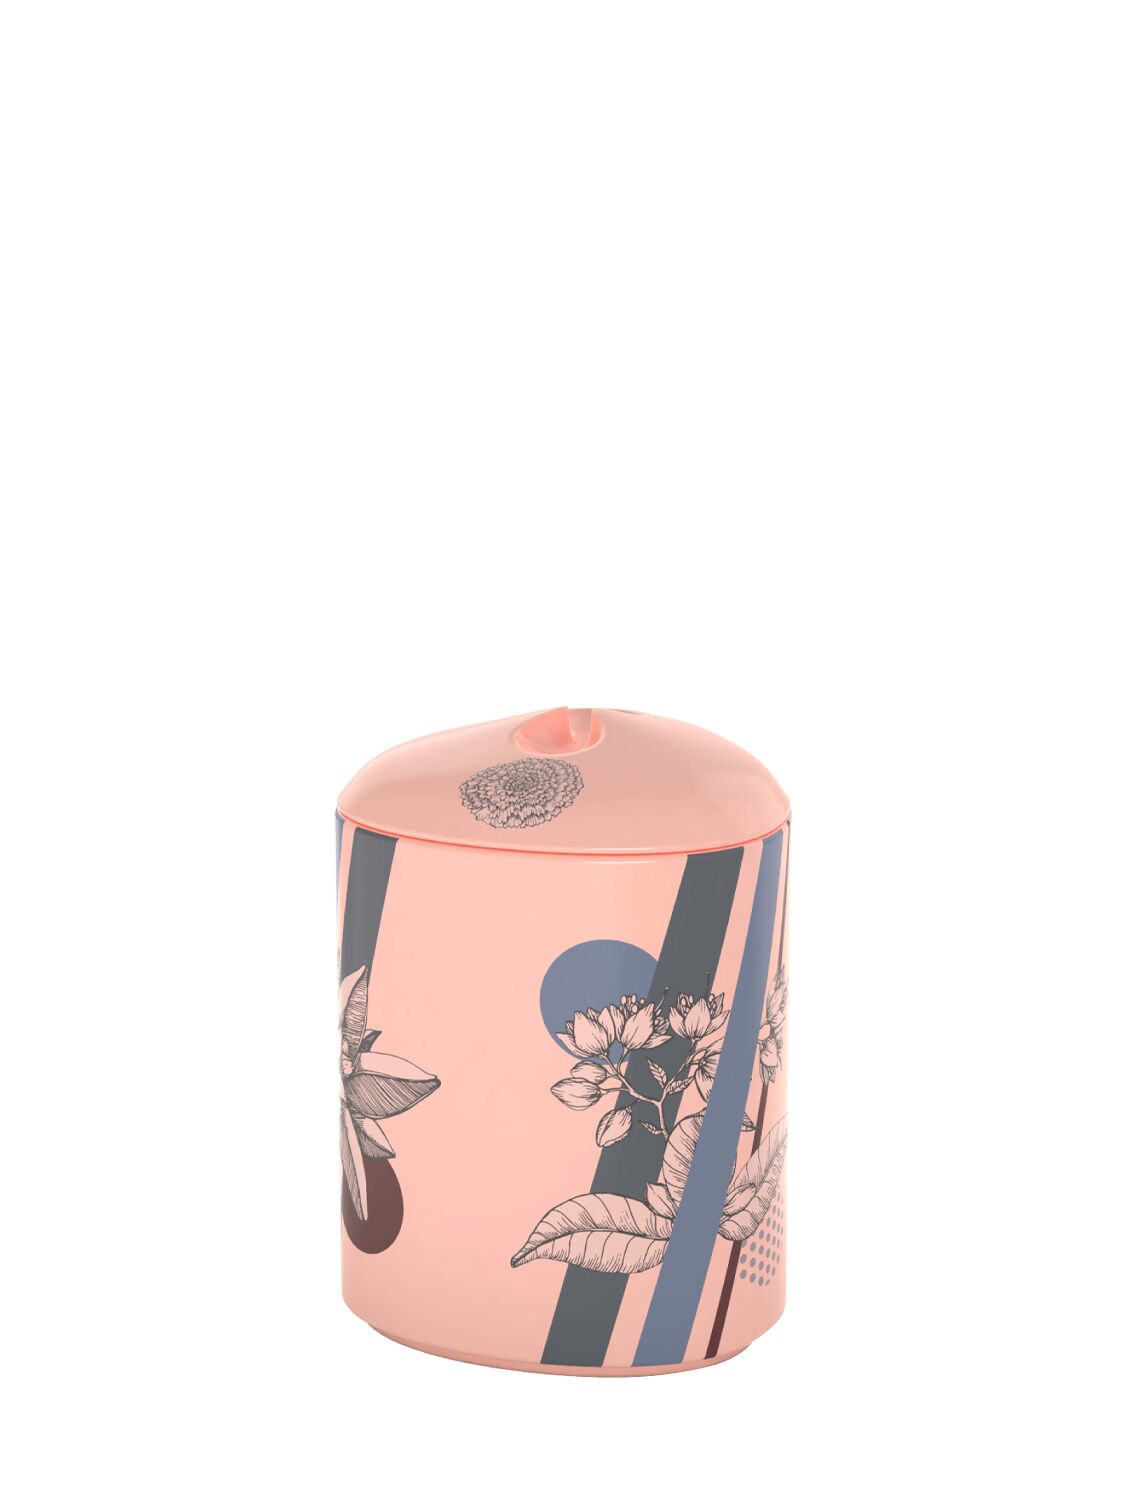 Shop Essensitive 320gr Zyz Candle In Pink